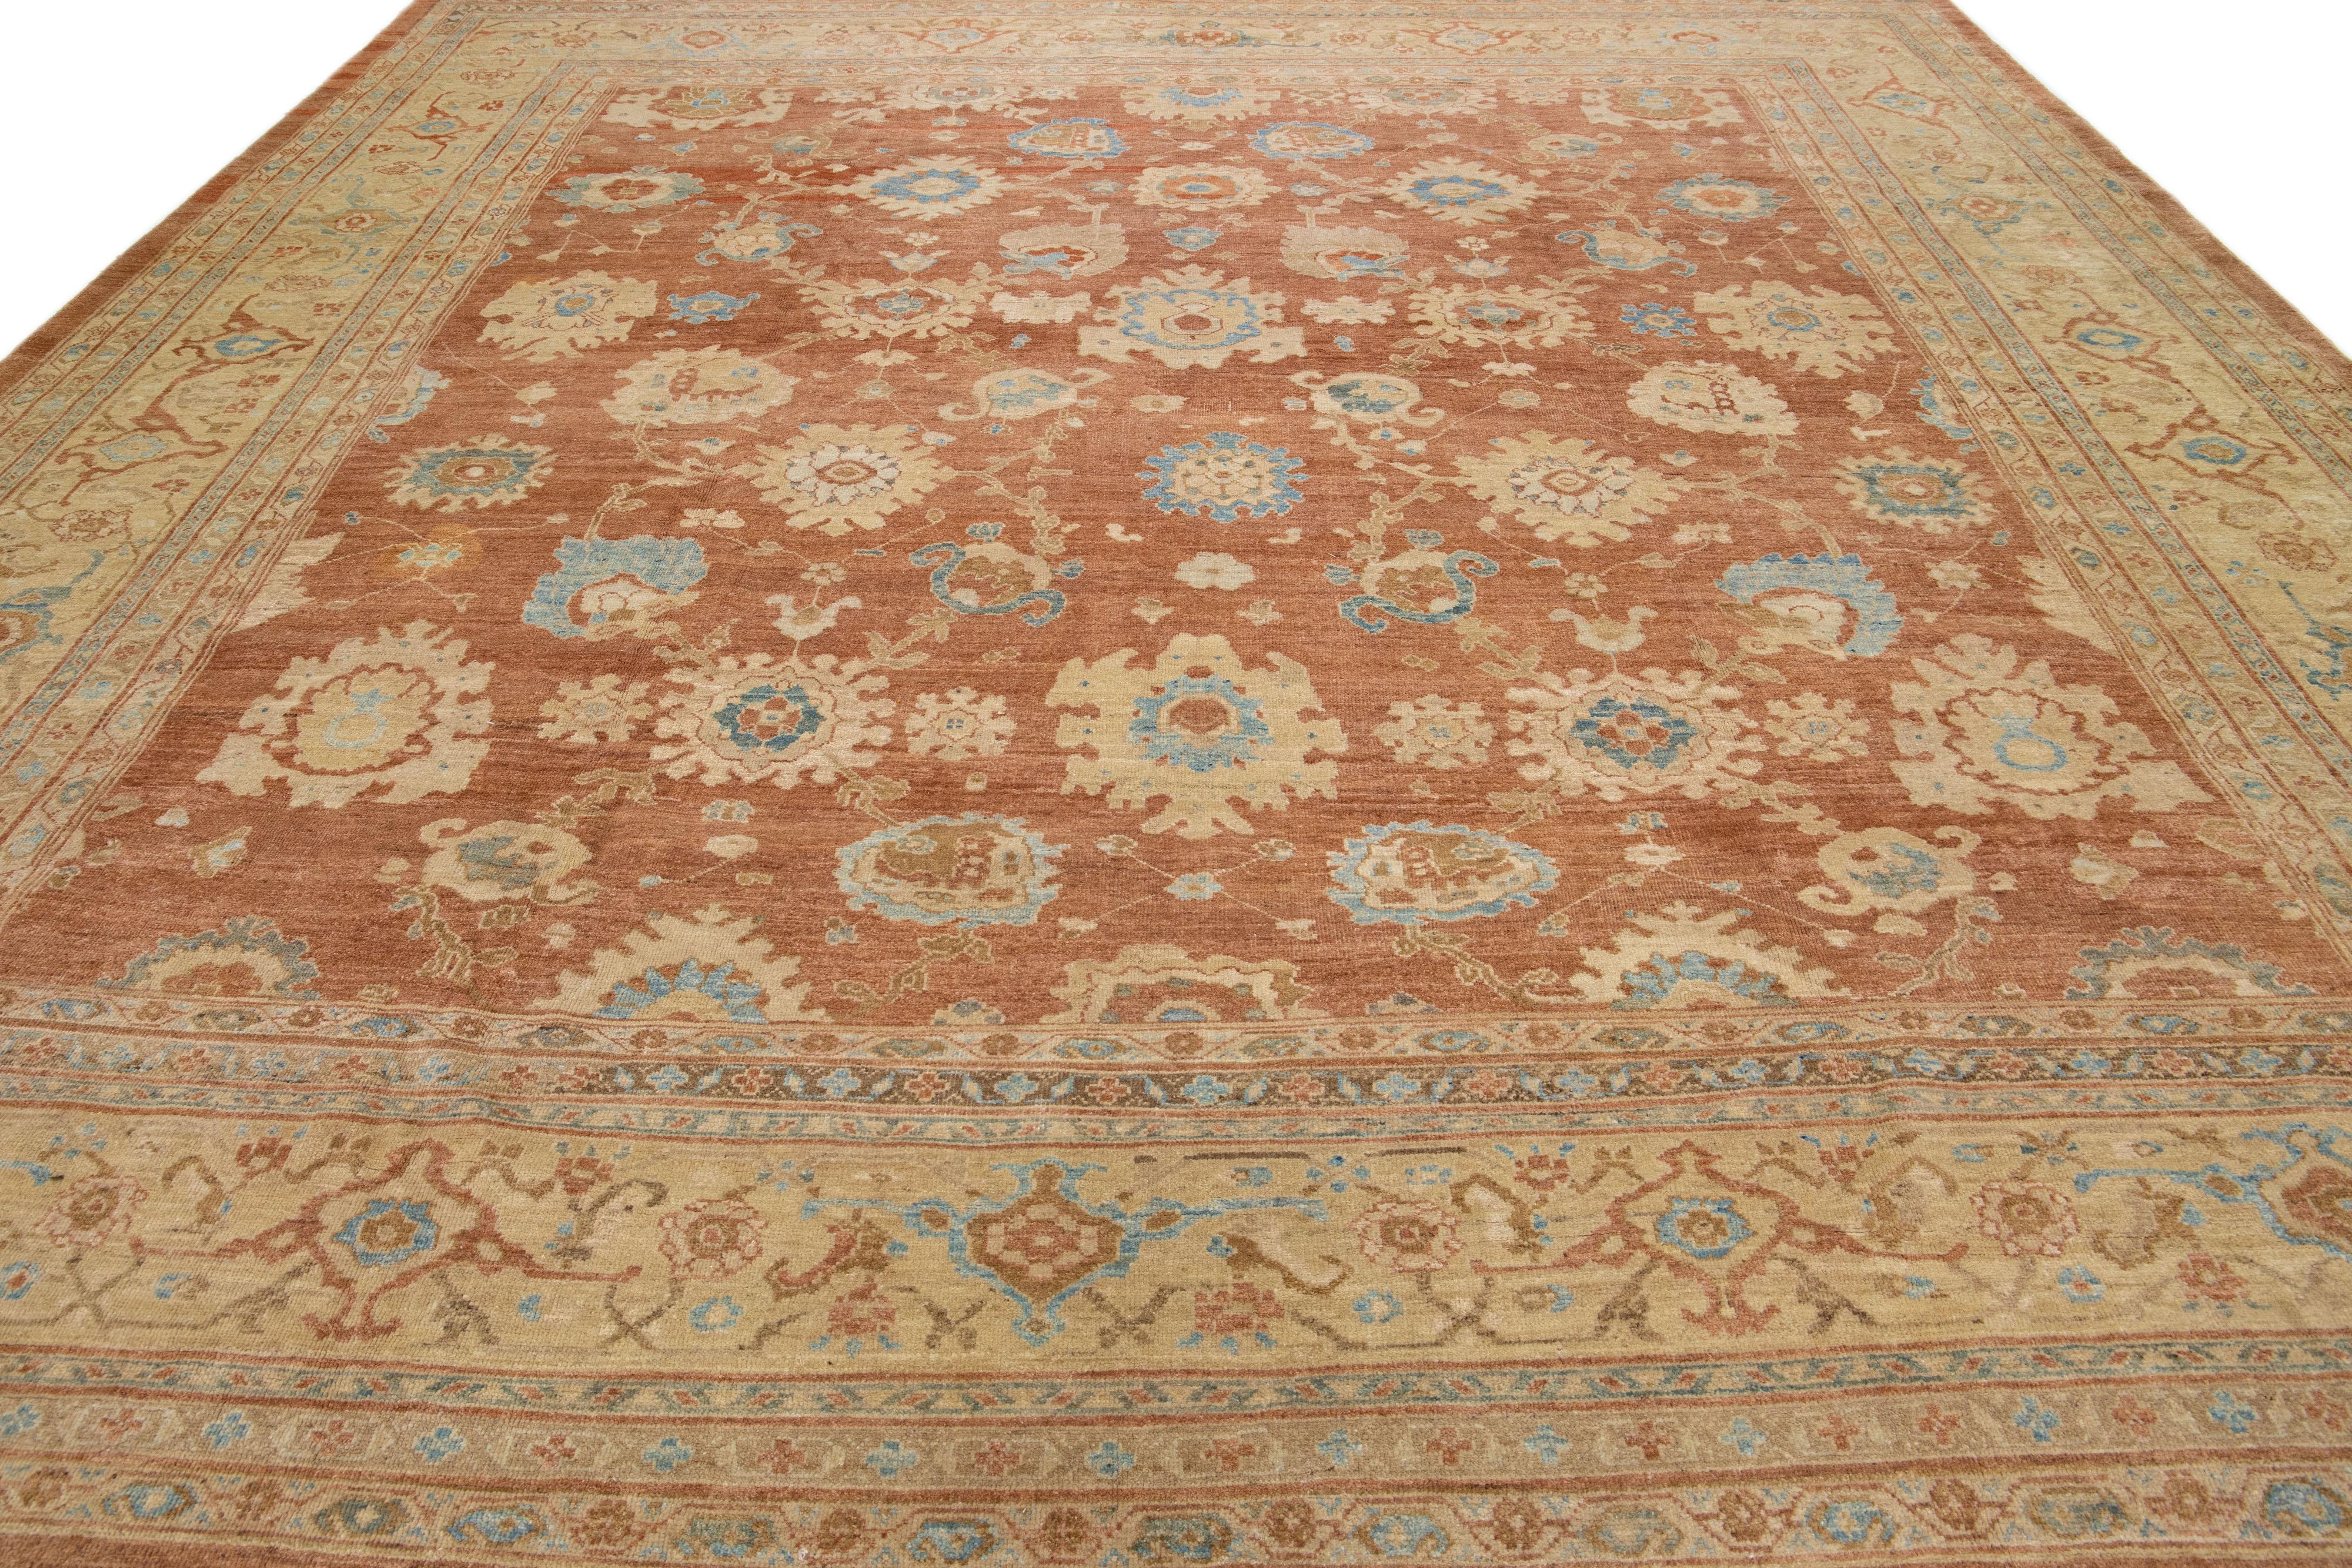 Modern Sultanabad design is flawlessly embodied in a meticulously handcrafted wool rug, displaying an impressive brown hue that captivates the eye. A meticulous border gracefully outlines the intricate floral stitching that adorns the entire rug,